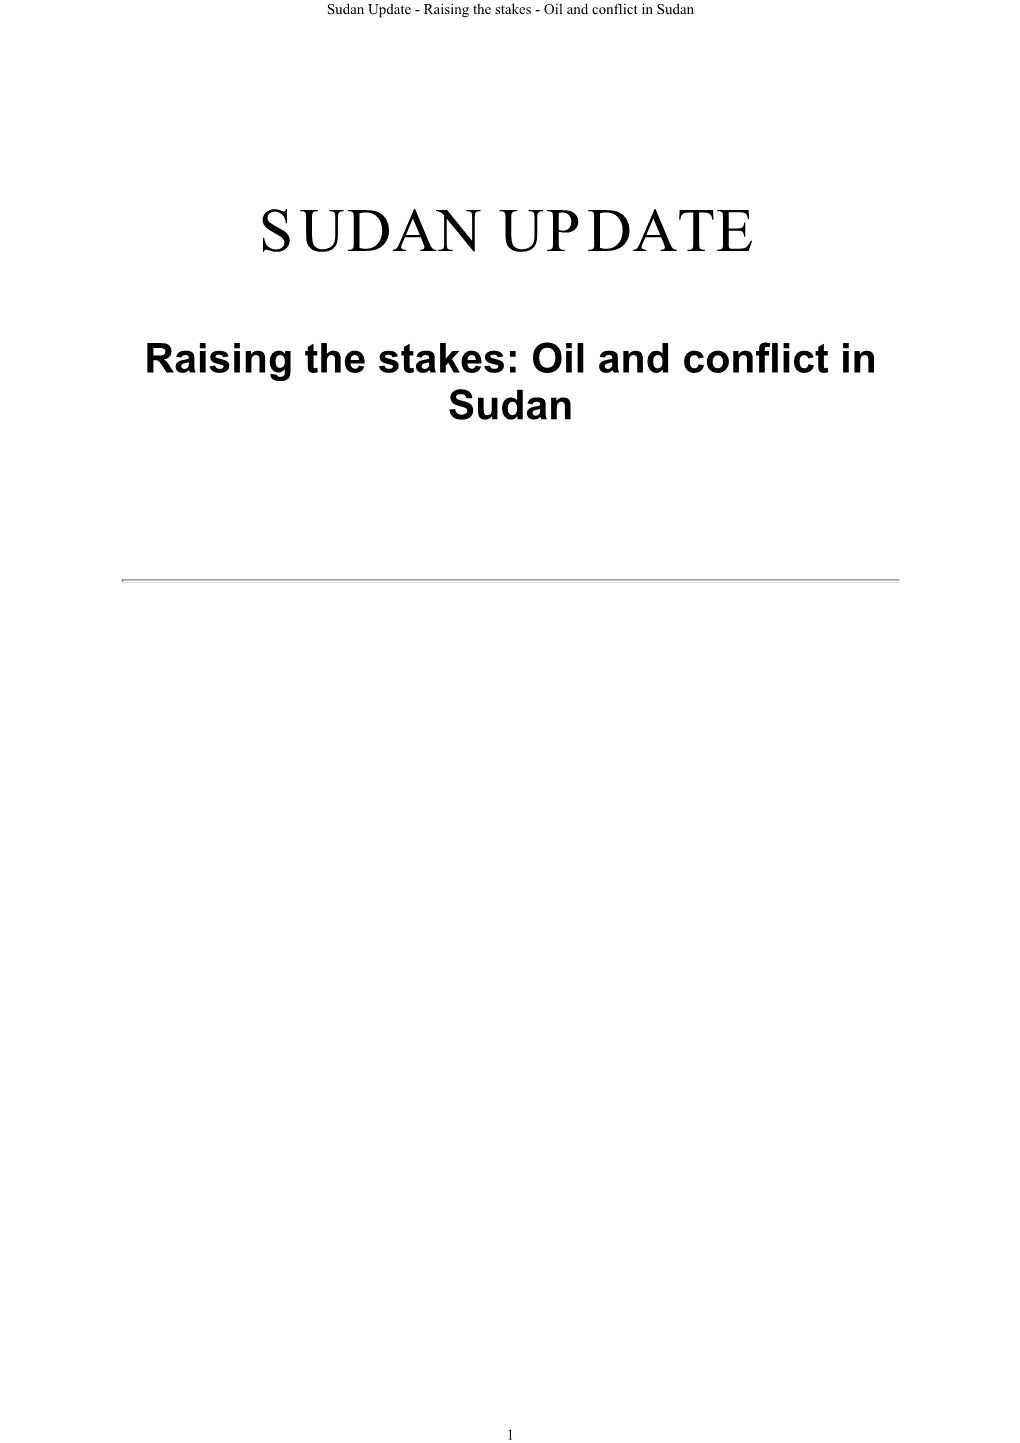 Oil and Conflict in Sudan